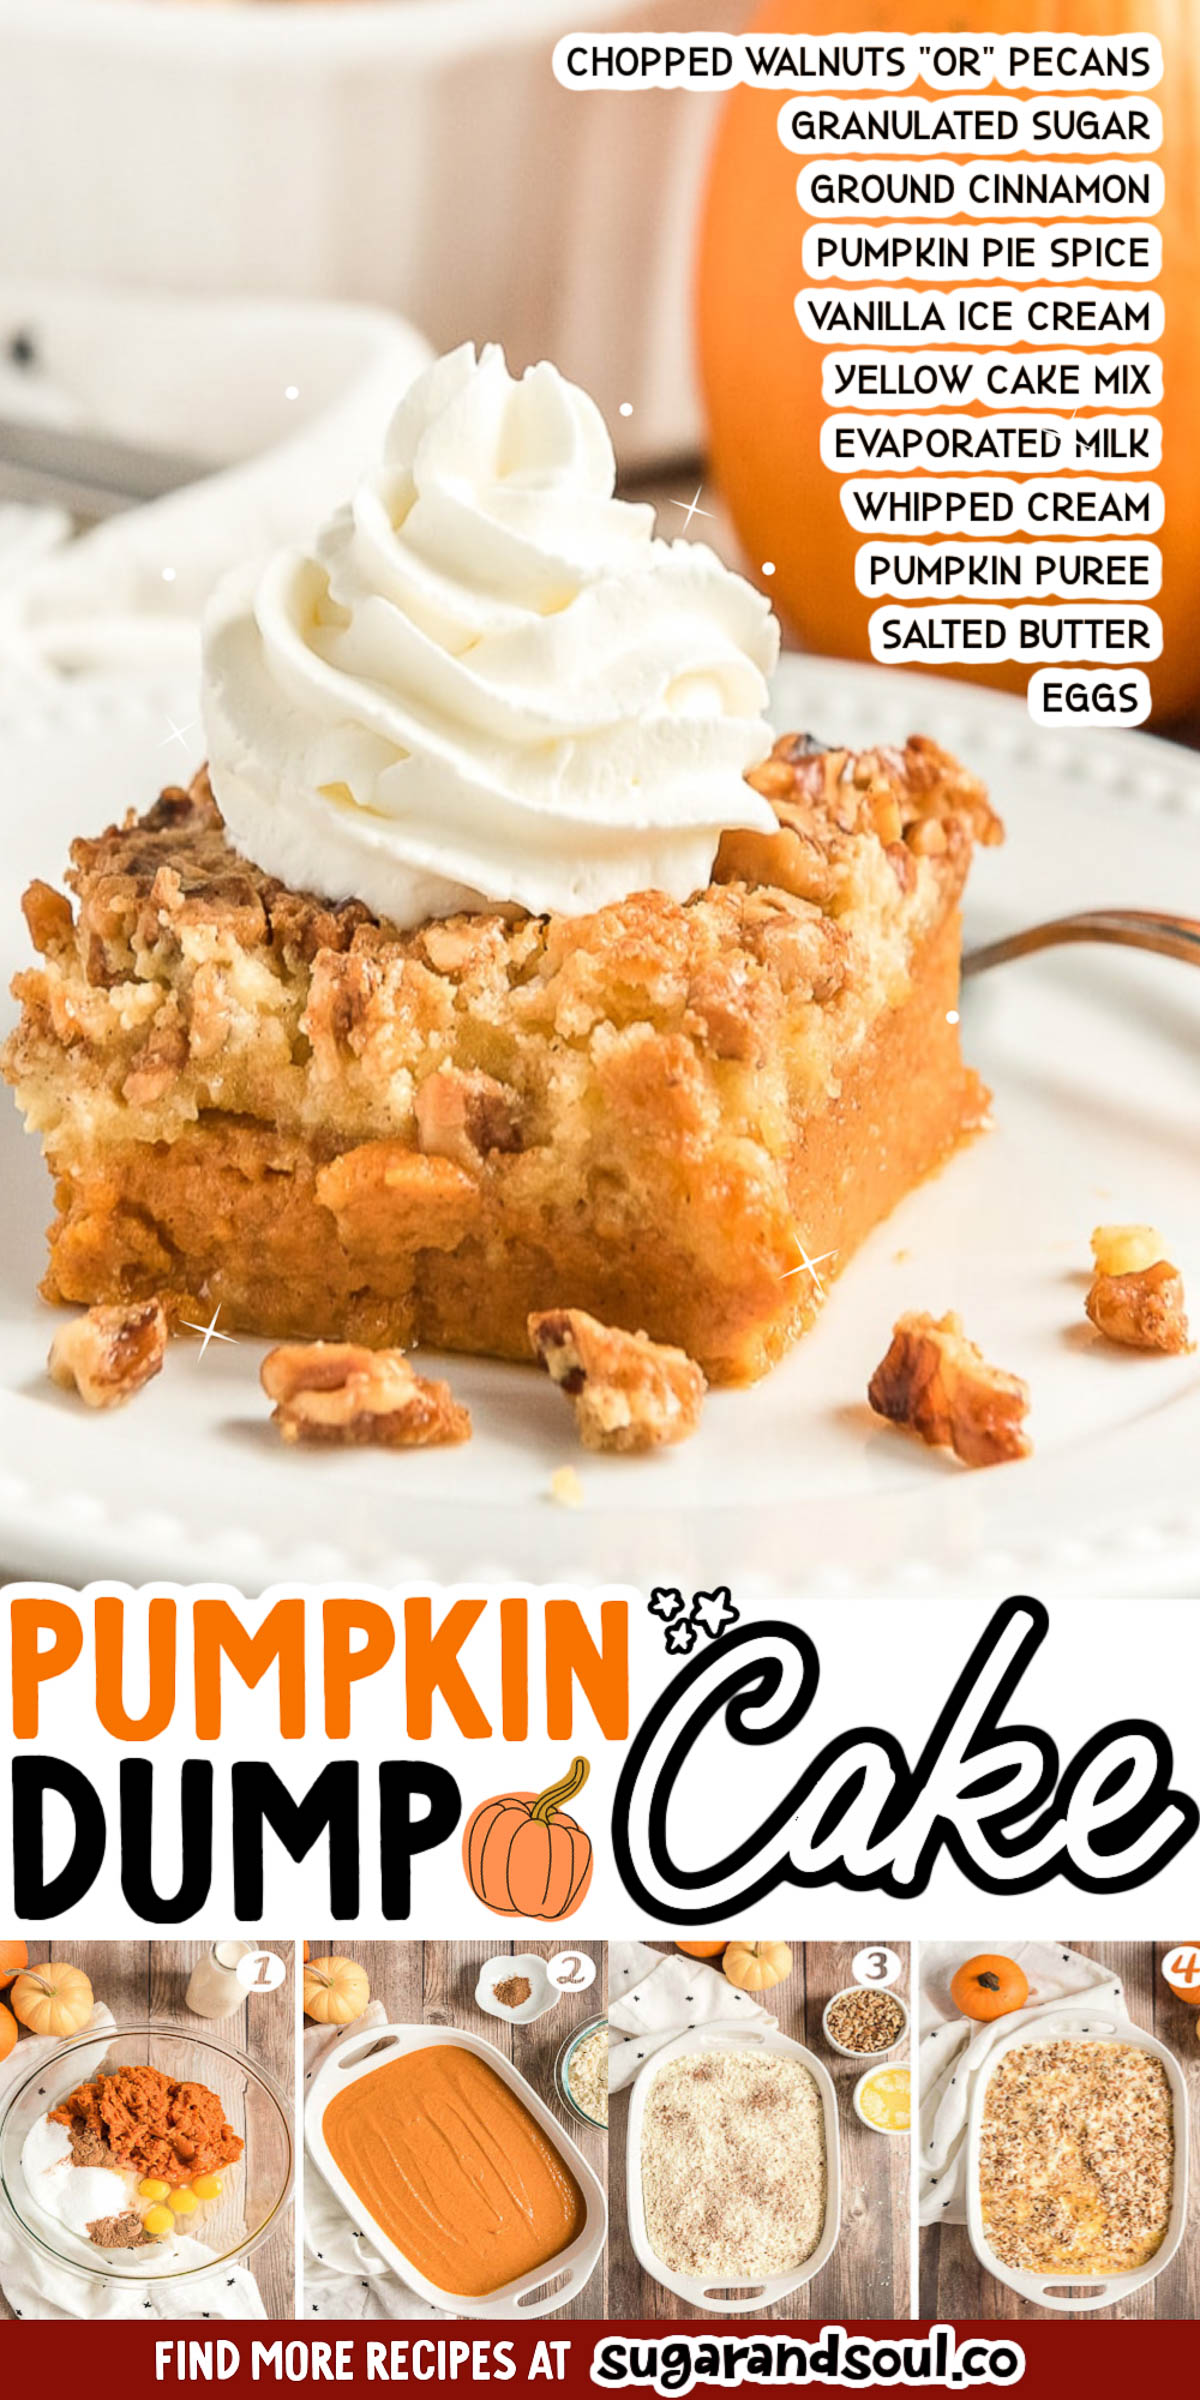 Pumpkin Dump Cake is the perfect fall dessert alternative to pumpkin pie! With a silky pumpkin base and a crumbly cake topping both loaded with Pumpkin Pie Spice and chopped nuts, this dessert's amazing layers will impress the whole family! via @sugarandsoulco